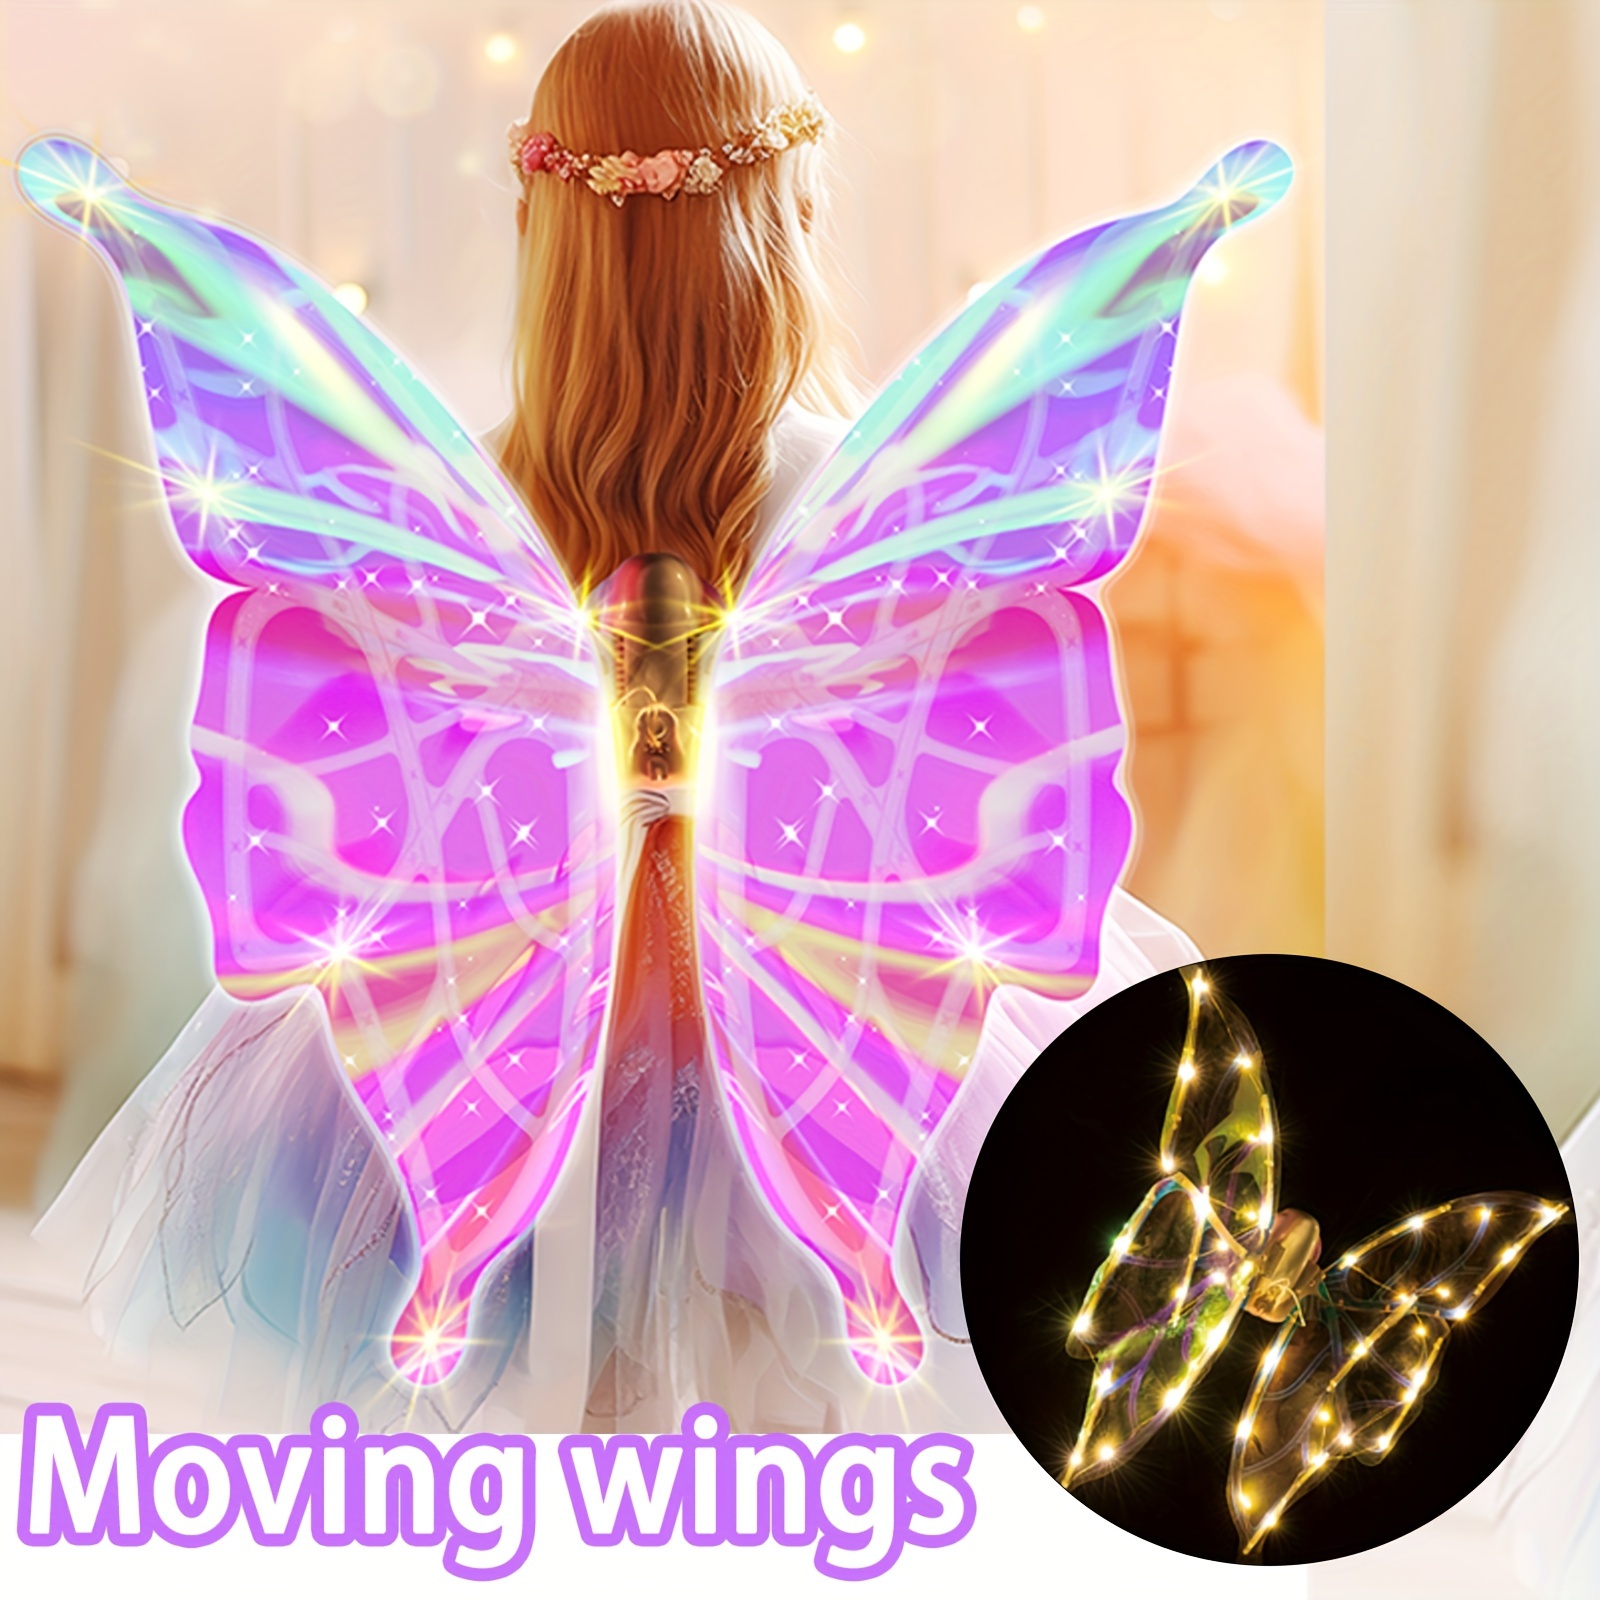 

Luminous Singing Fairy Costume Set Featuring Led Butterfly Wings - Ideal For Seasonal Celebrations & Birthday Gifts, New And Innovative Playset